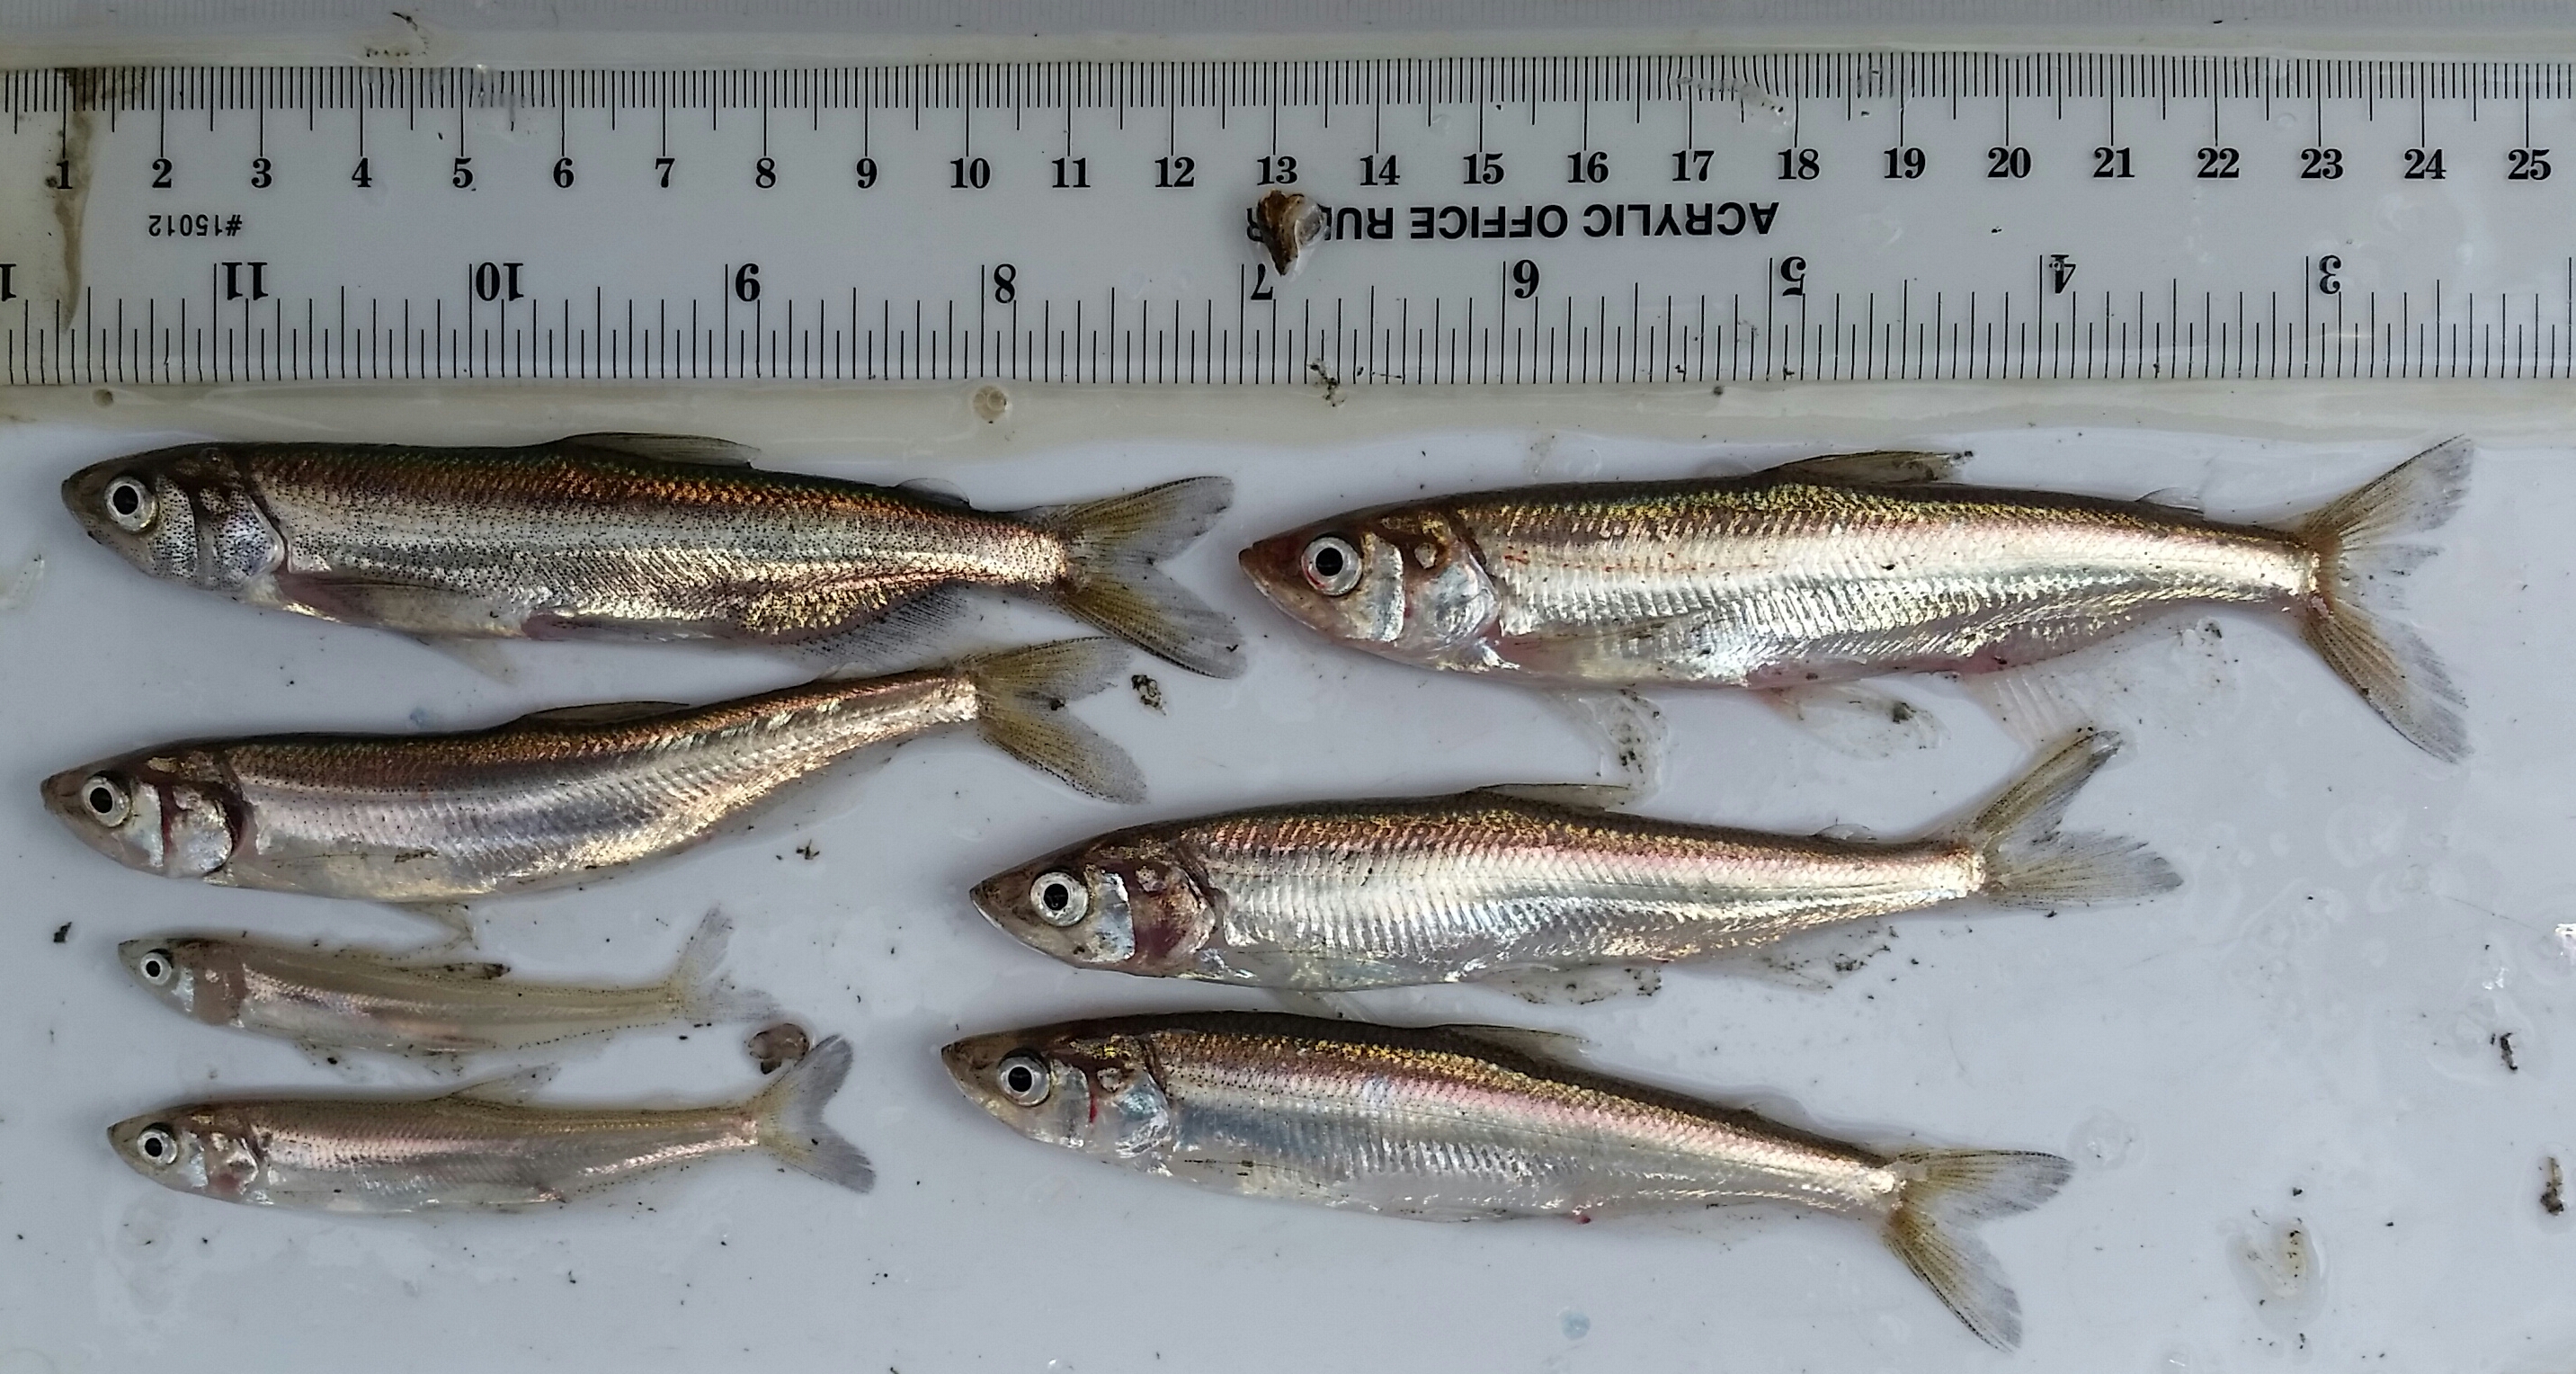 Multiple life stages of male and female Longfin Smelt from the San Francisco Estuary.